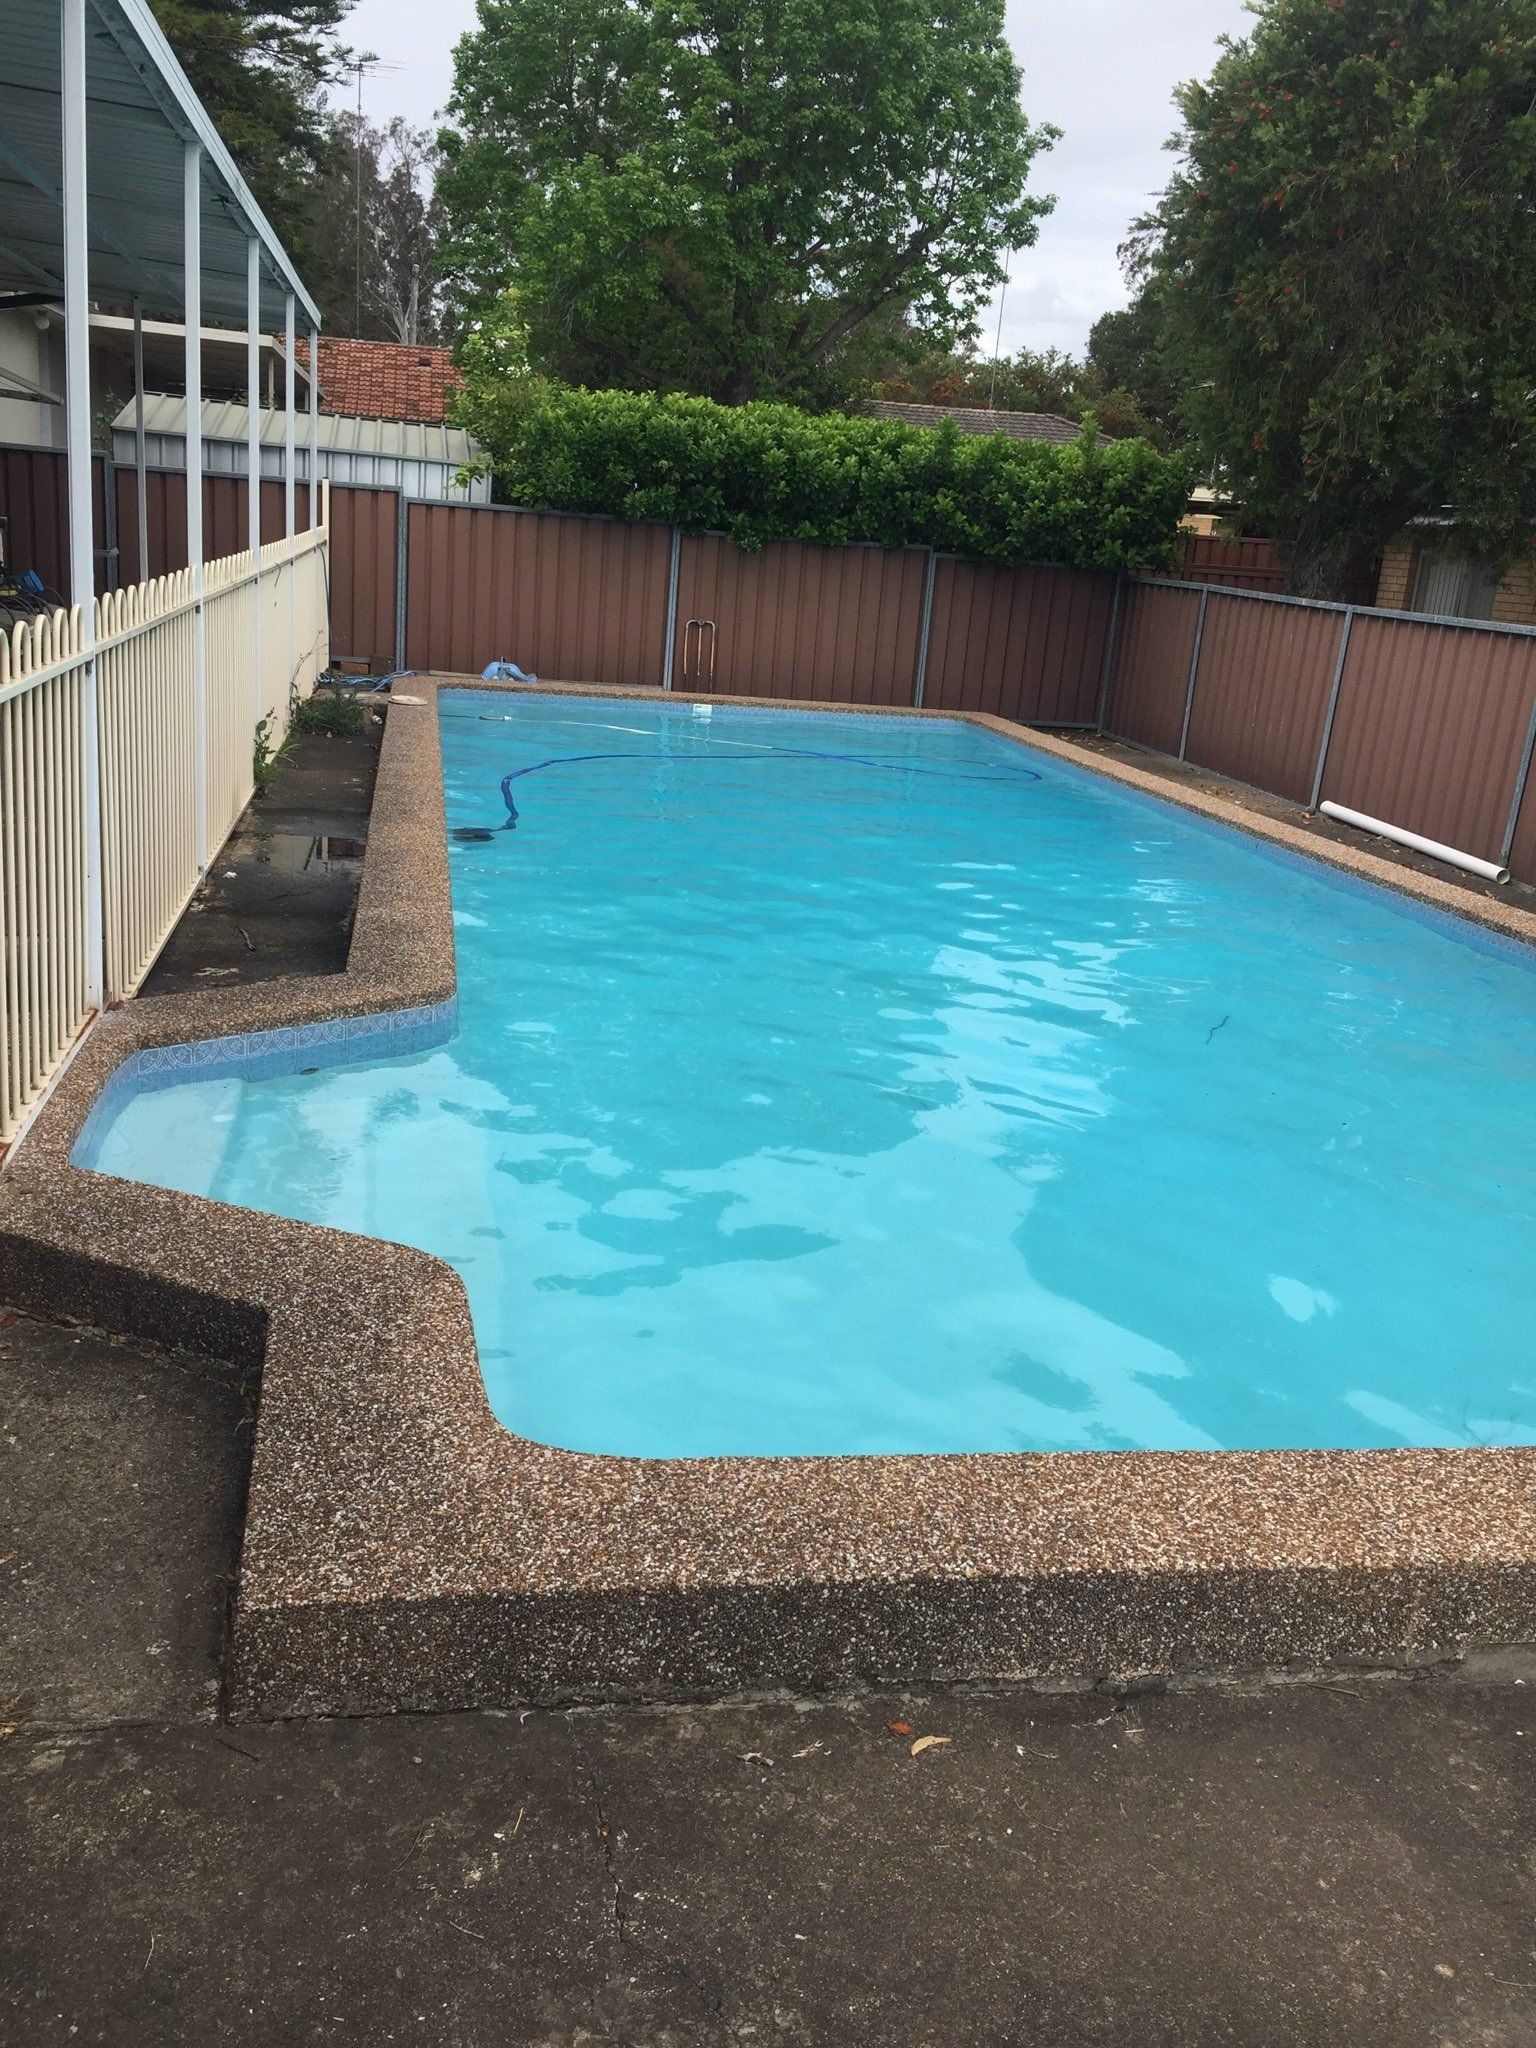 Clean blue water in the swimming pool | Penrith, NSW | Ian’s Pools Penrith